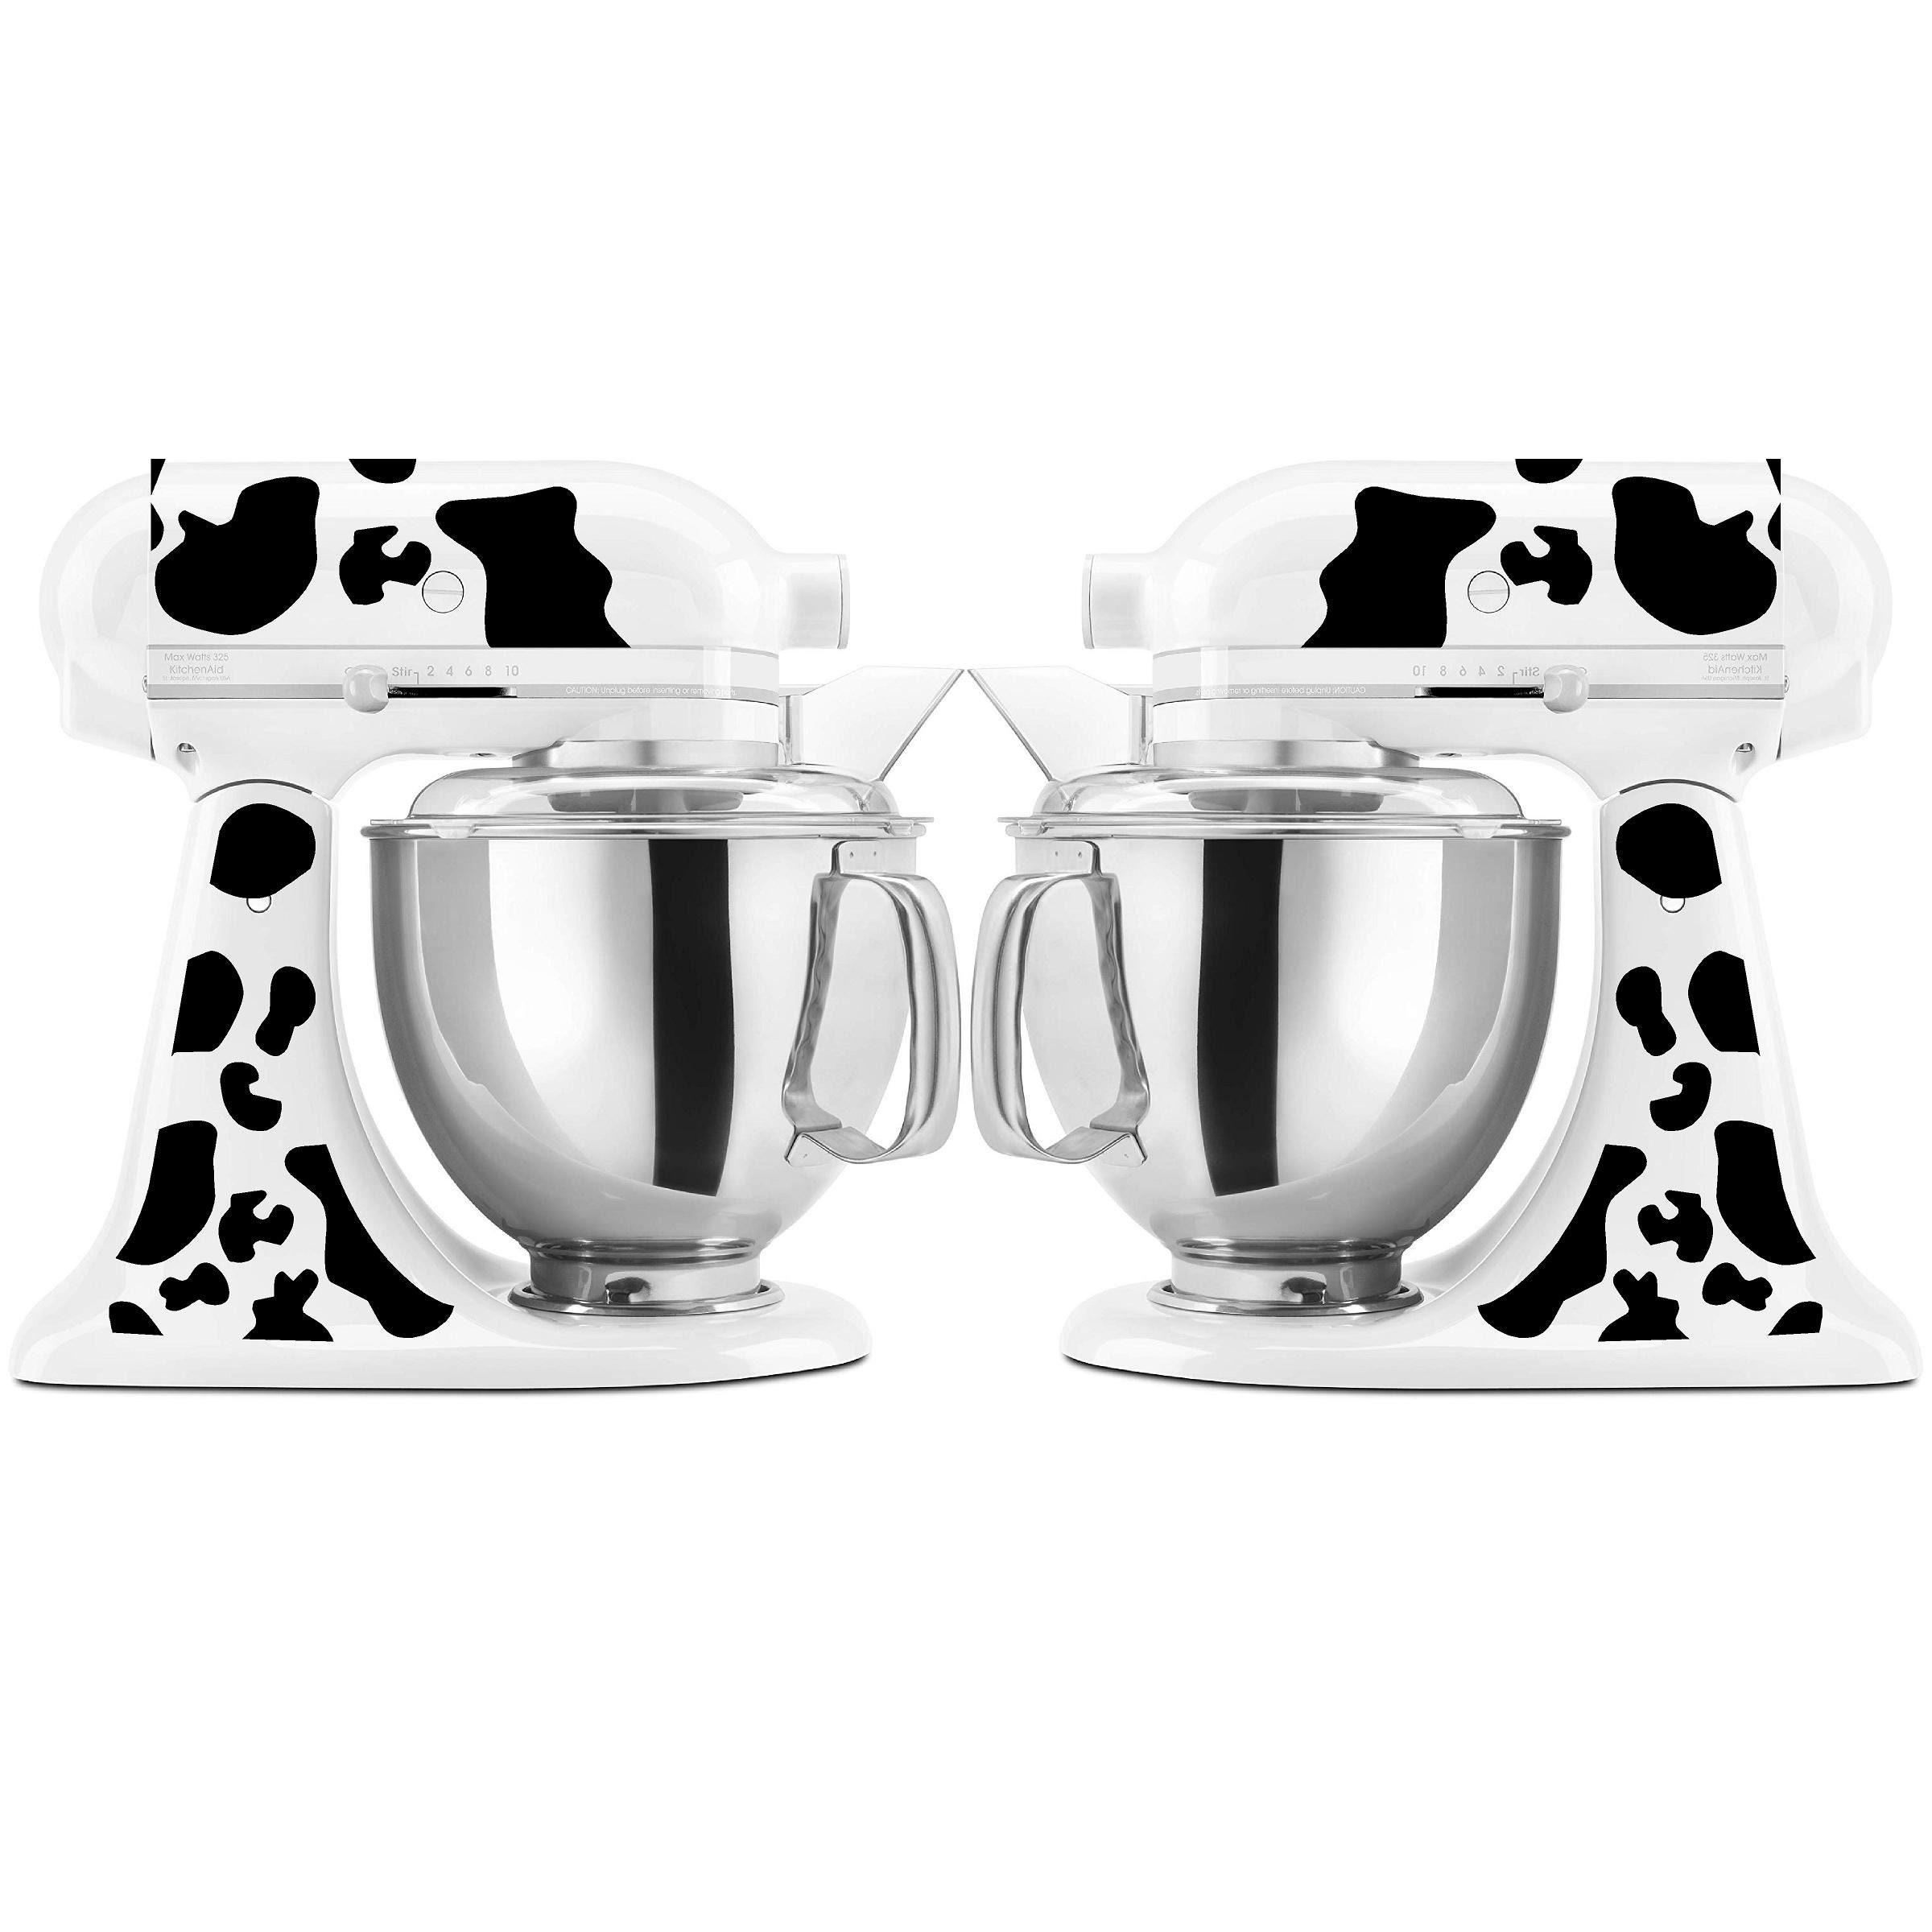 Cow Print White And Black Kitchen Aid Mixer Cover Compatible with